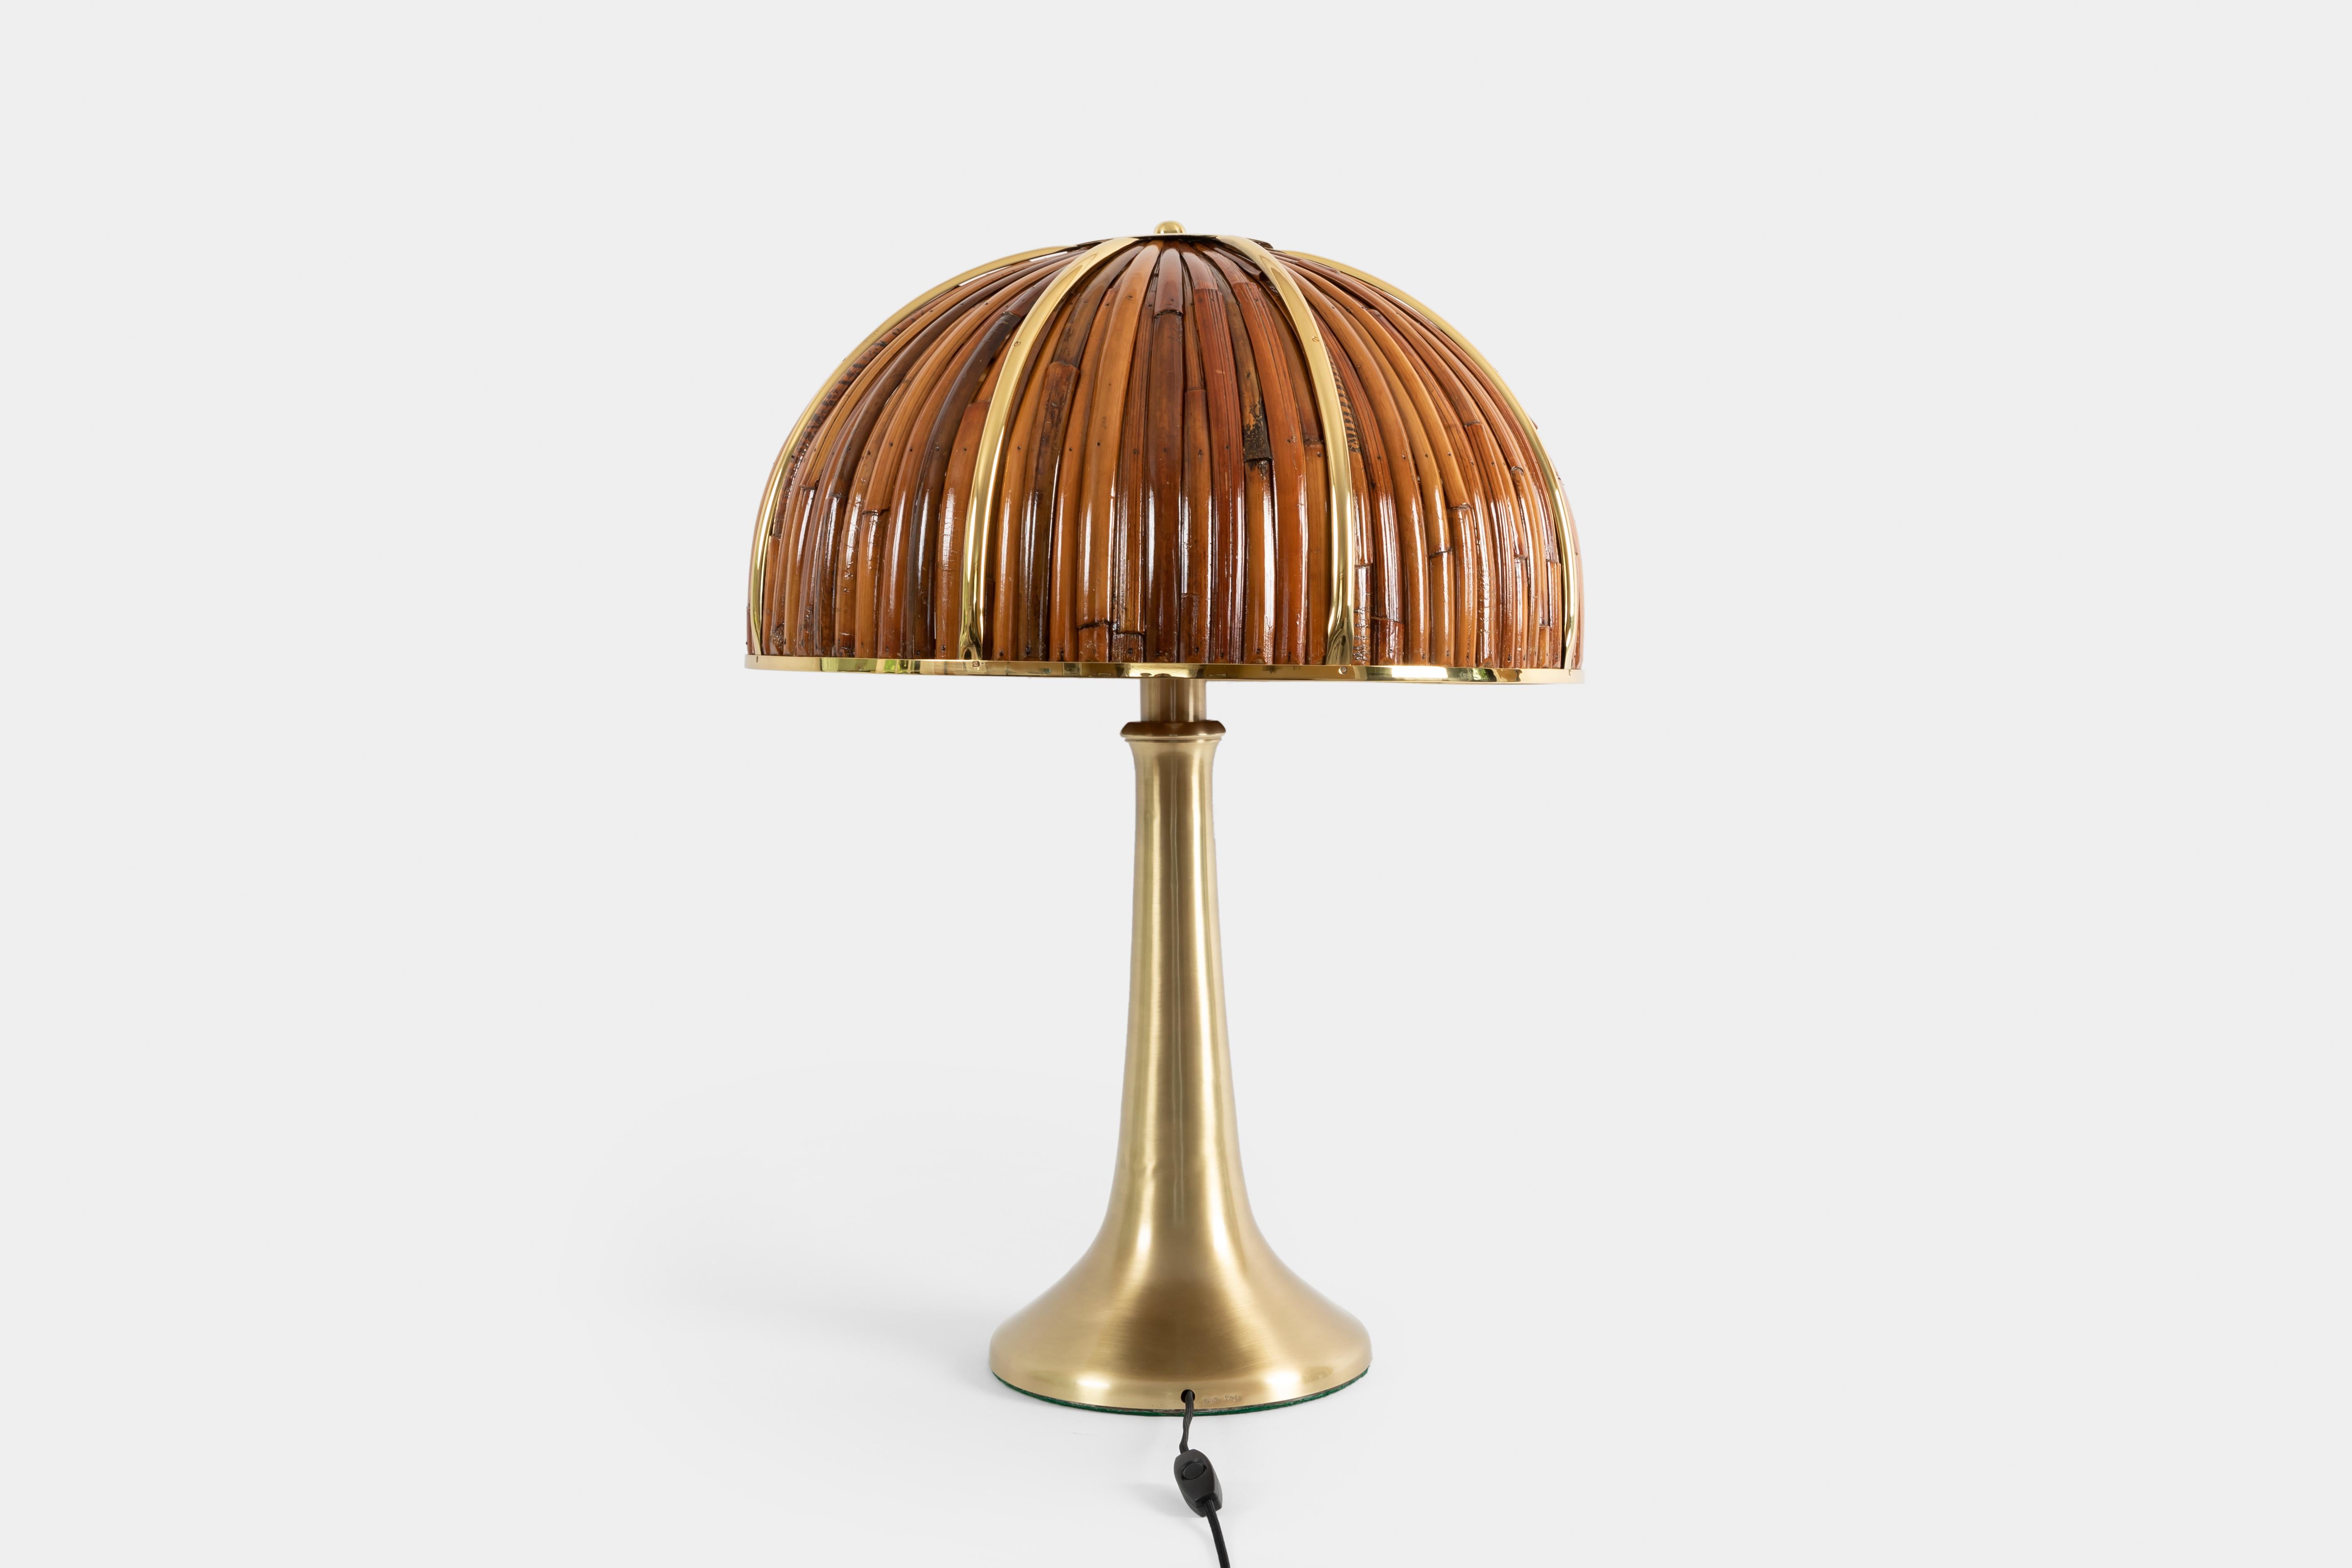 Large and striking 'Fungo' table lamp from the iconic Rising Sun Series with lacquered bamboo and polished brass dome shade and elegant flared brass base in a brushed gold finish, Italy, 1970s. Impressed with facsimile signature and artist’s cipher